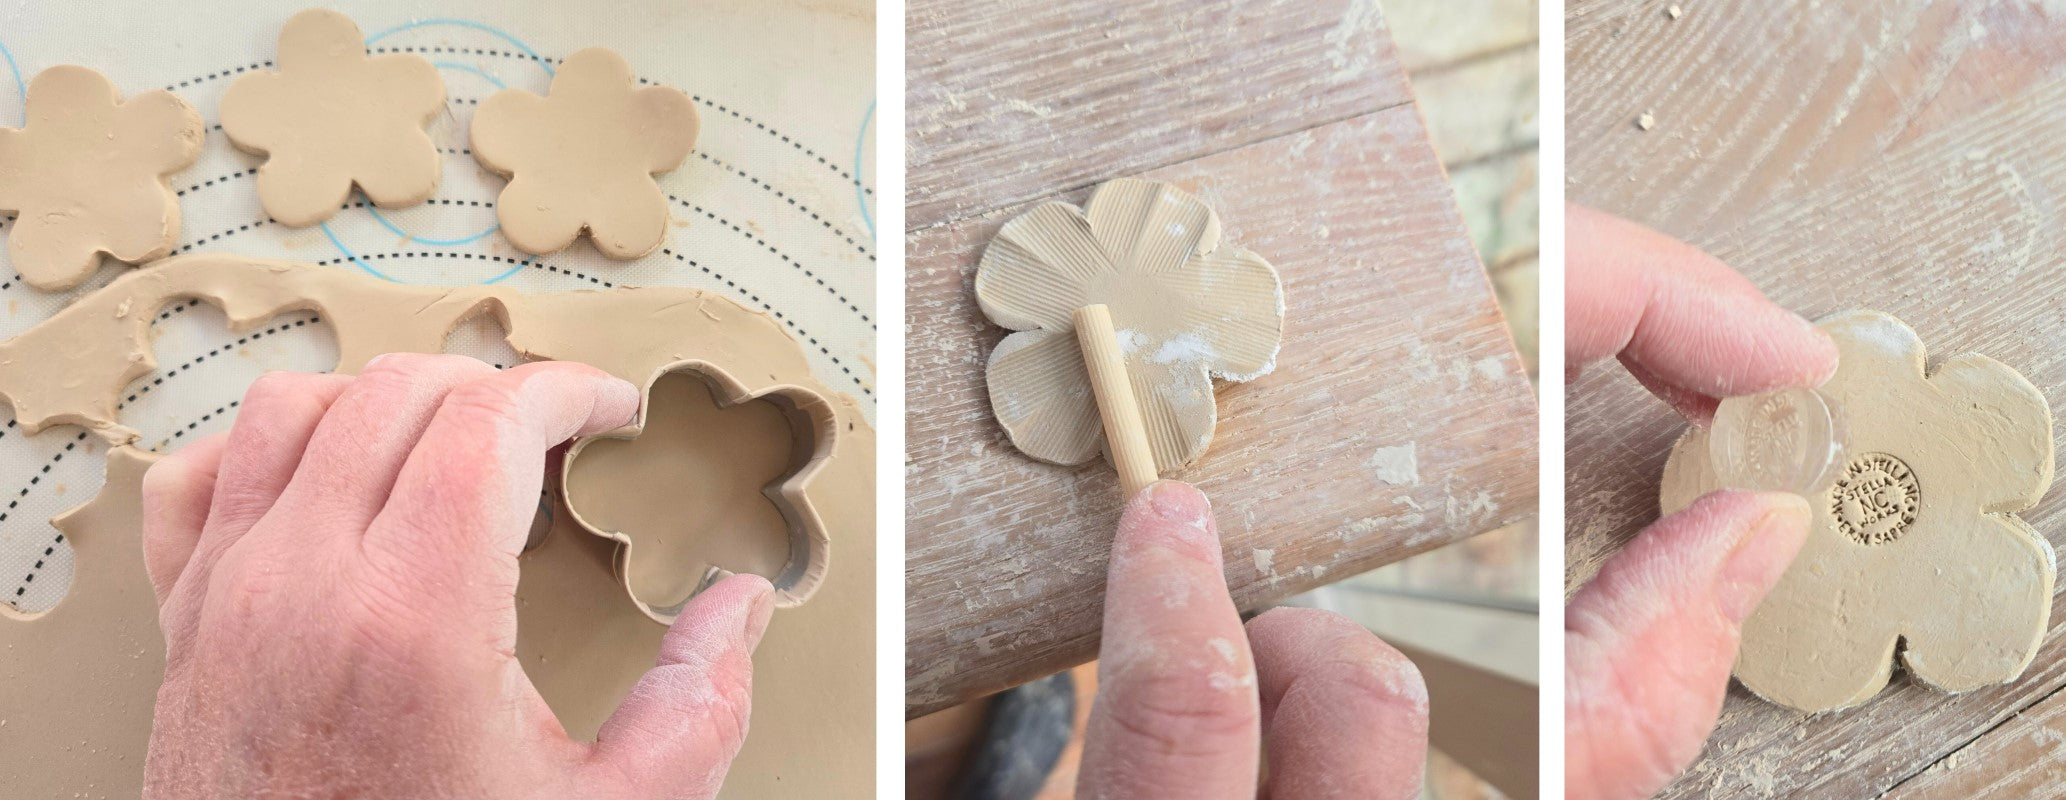 To the left, a hand holds the flower-shaped cookie cutter above the clay. There are already several flower shapes cut out of the clay slab. I the middle, a hand holds a textured stick and applies it to one of the clay flowers. To the right, a hand holds an acrylic stamp after having stamped the logo into the clay. The logo is a circle that says Stella NC Works, Made in NC by Erin Sapre.